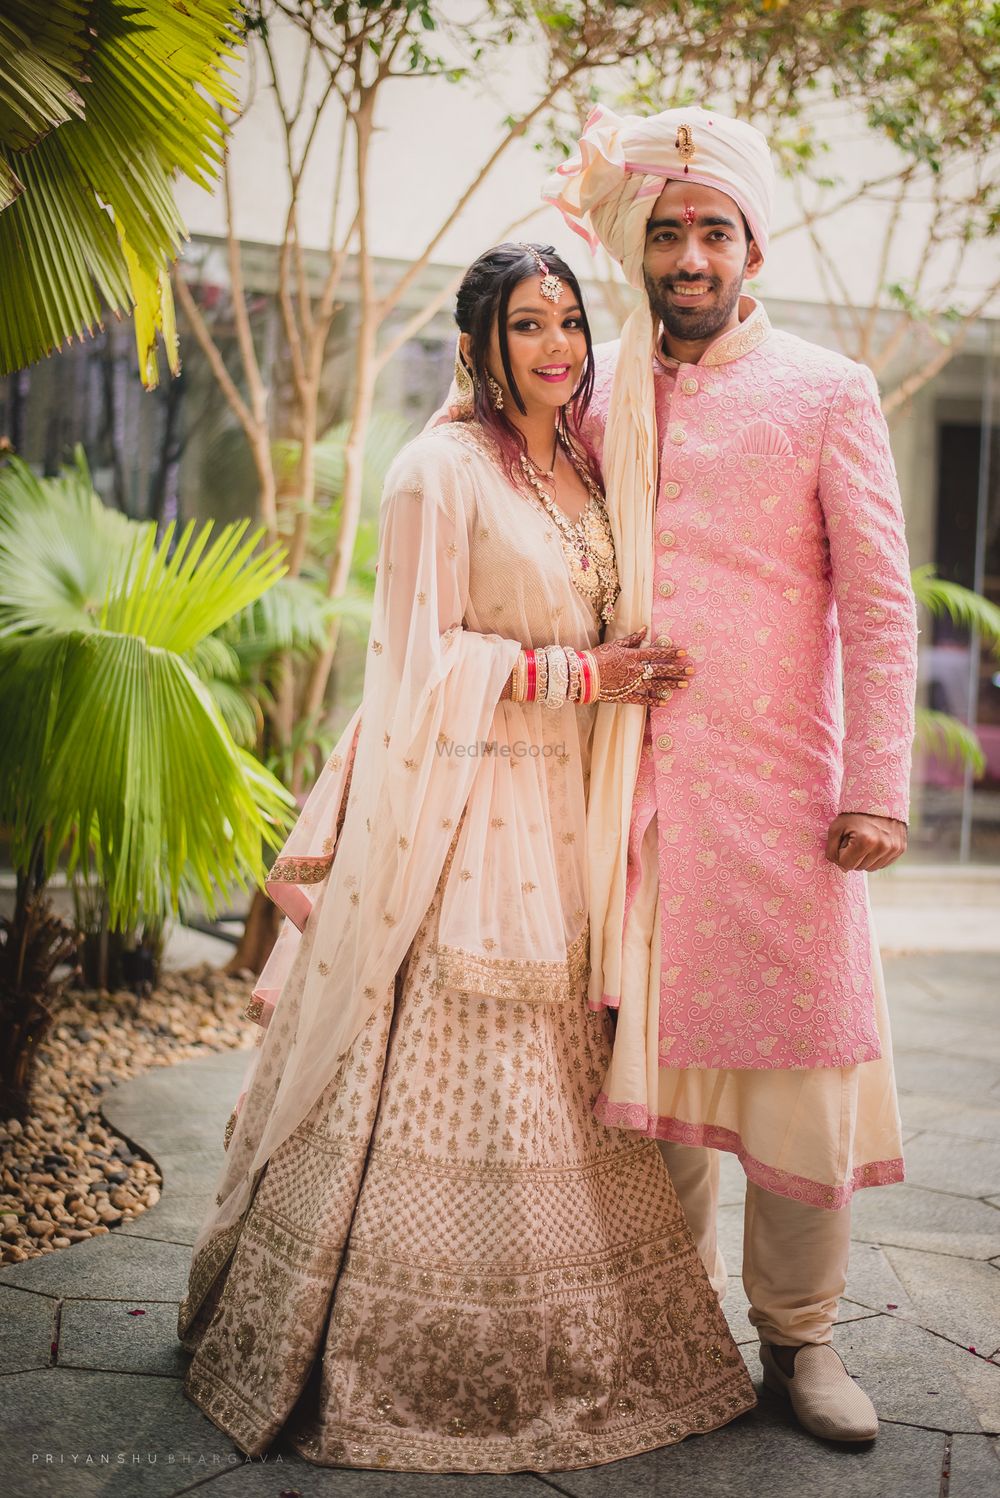 Photo of Bride and groom in matching light pink outfits